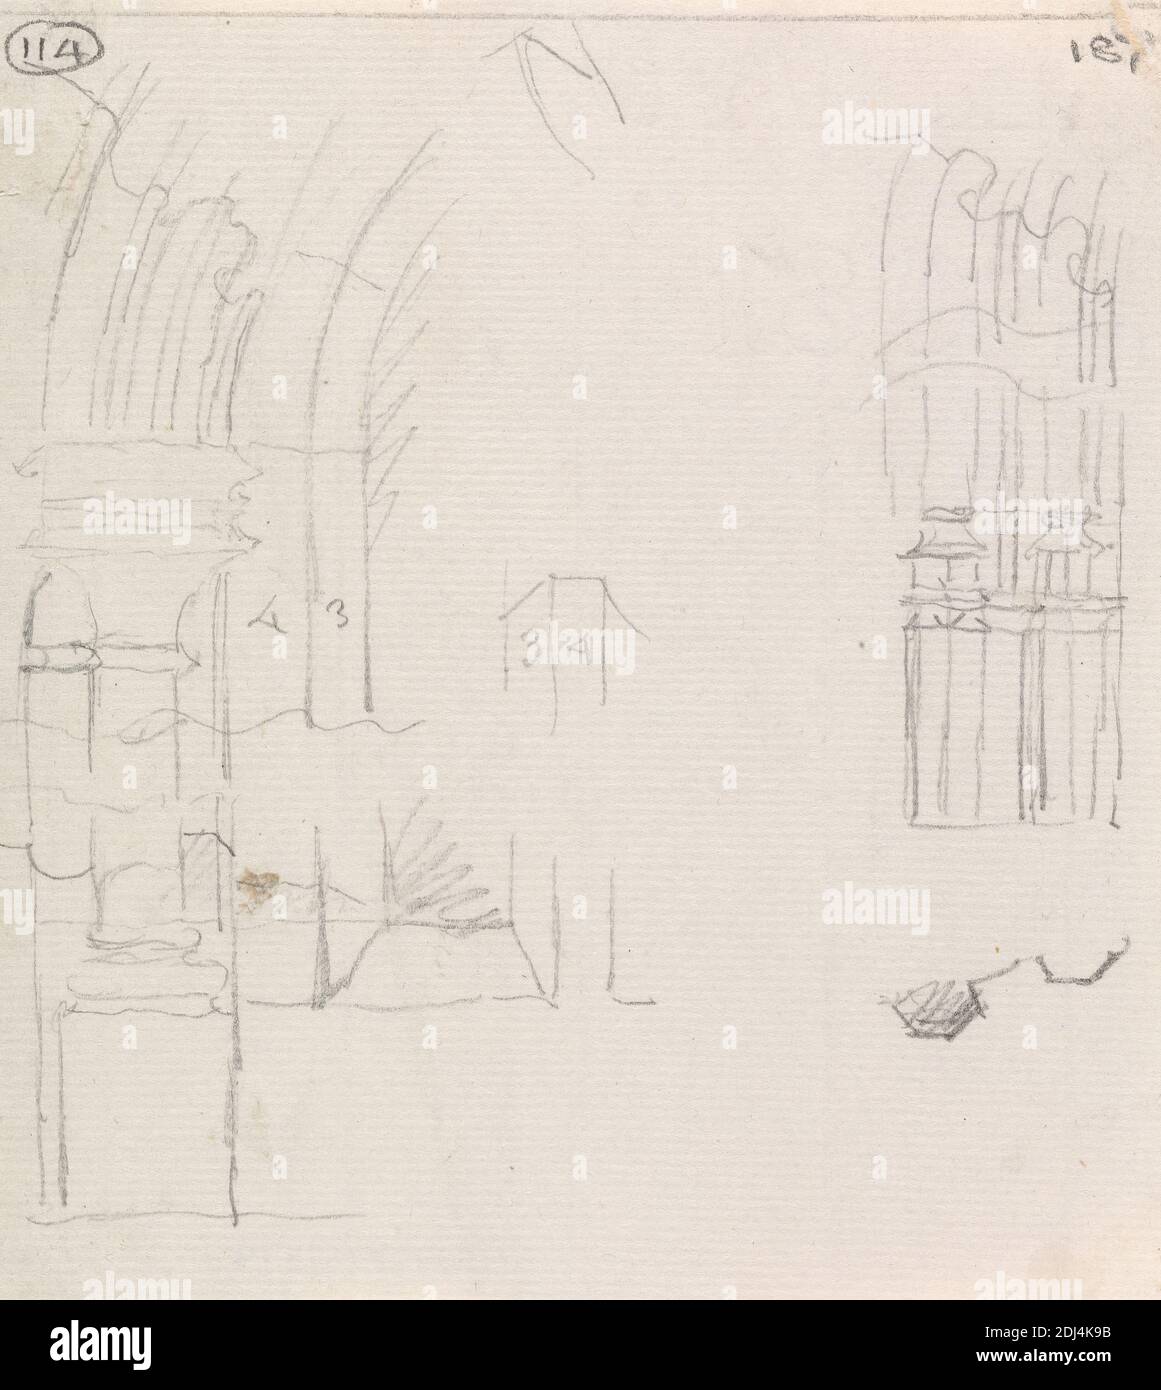 Details of Capitals and Arches, Painted Chamber, unknown artist, between 1793 and 1799, Graphite on medium, slightly textured, white laid paper, Sheet: 5 3/4 × 5 1/16 inches (14.6 × 12.9 cm), architectural subject, City of Westminster, England, London, Palace of Westminster, United Kingdom Stock Photo